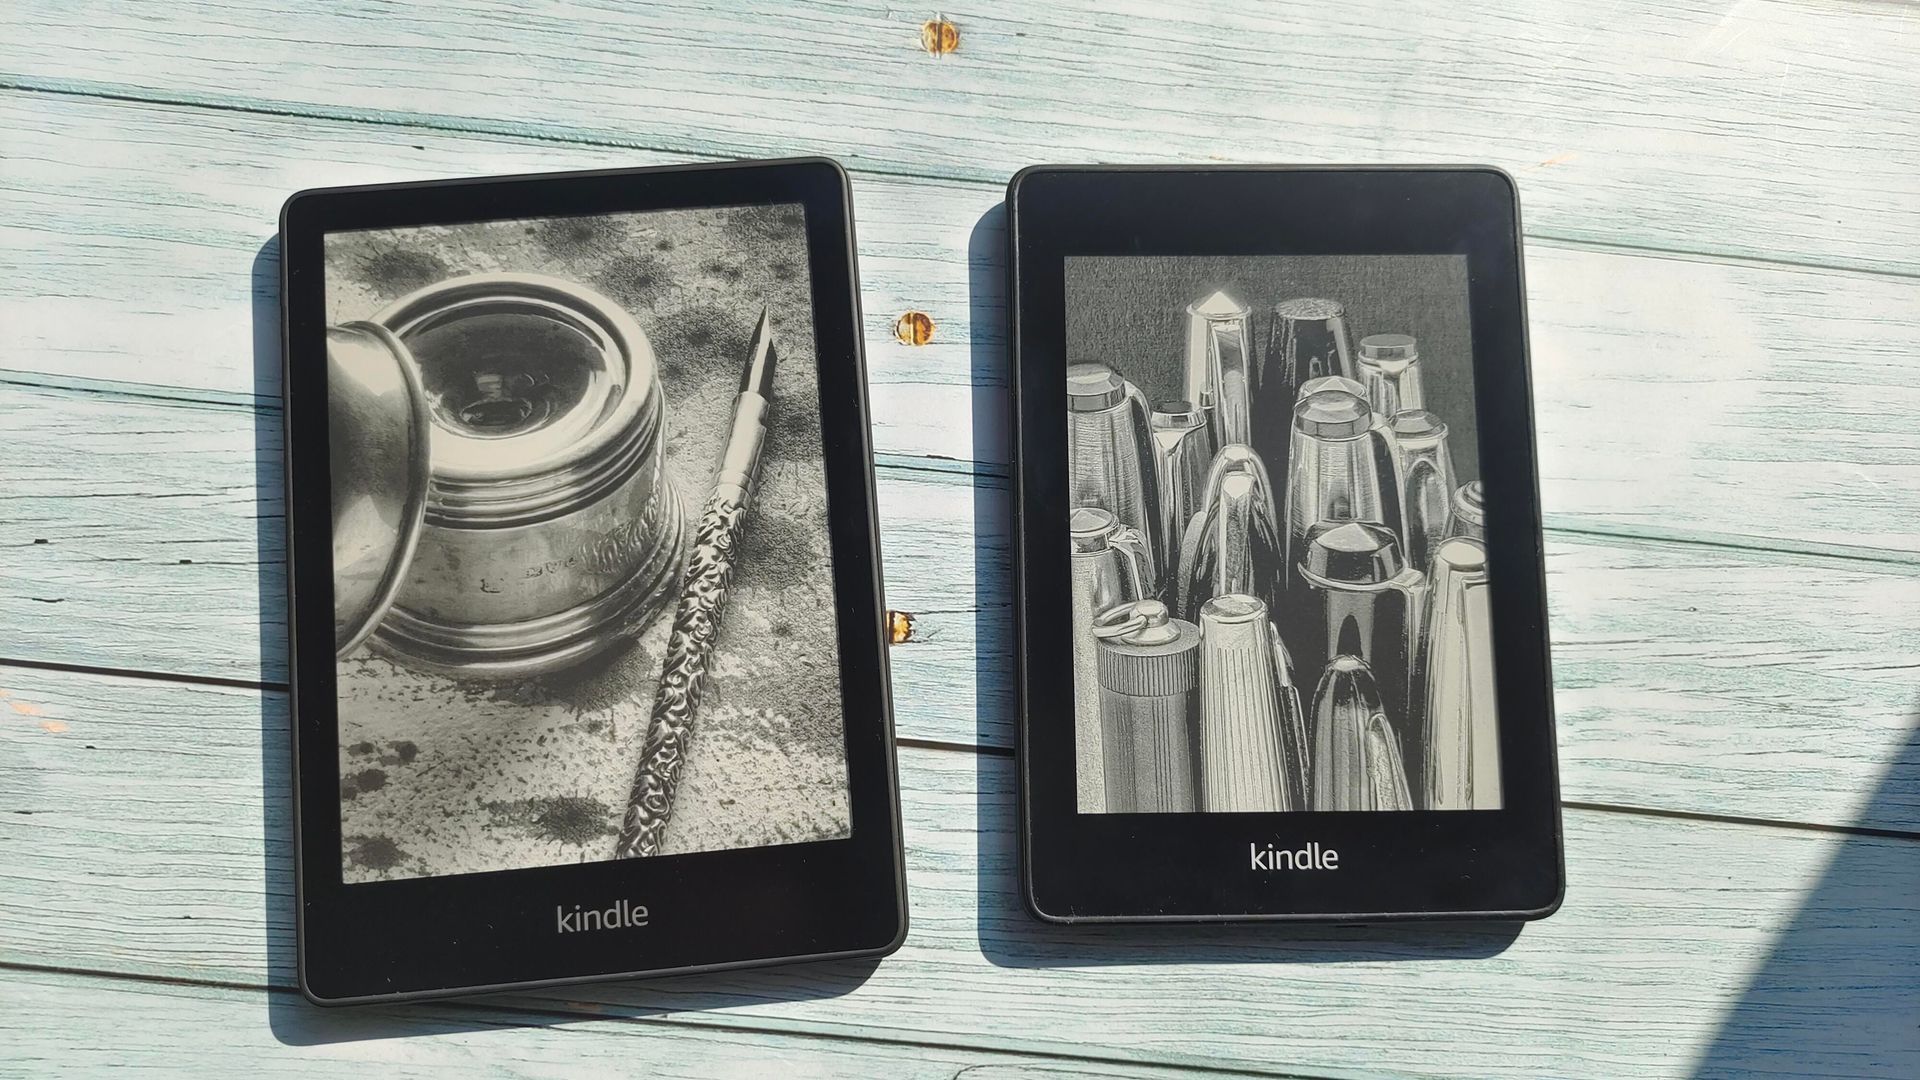 Kindle Paperwhite 11th Gen and Paperwhite 10th Gen side by side